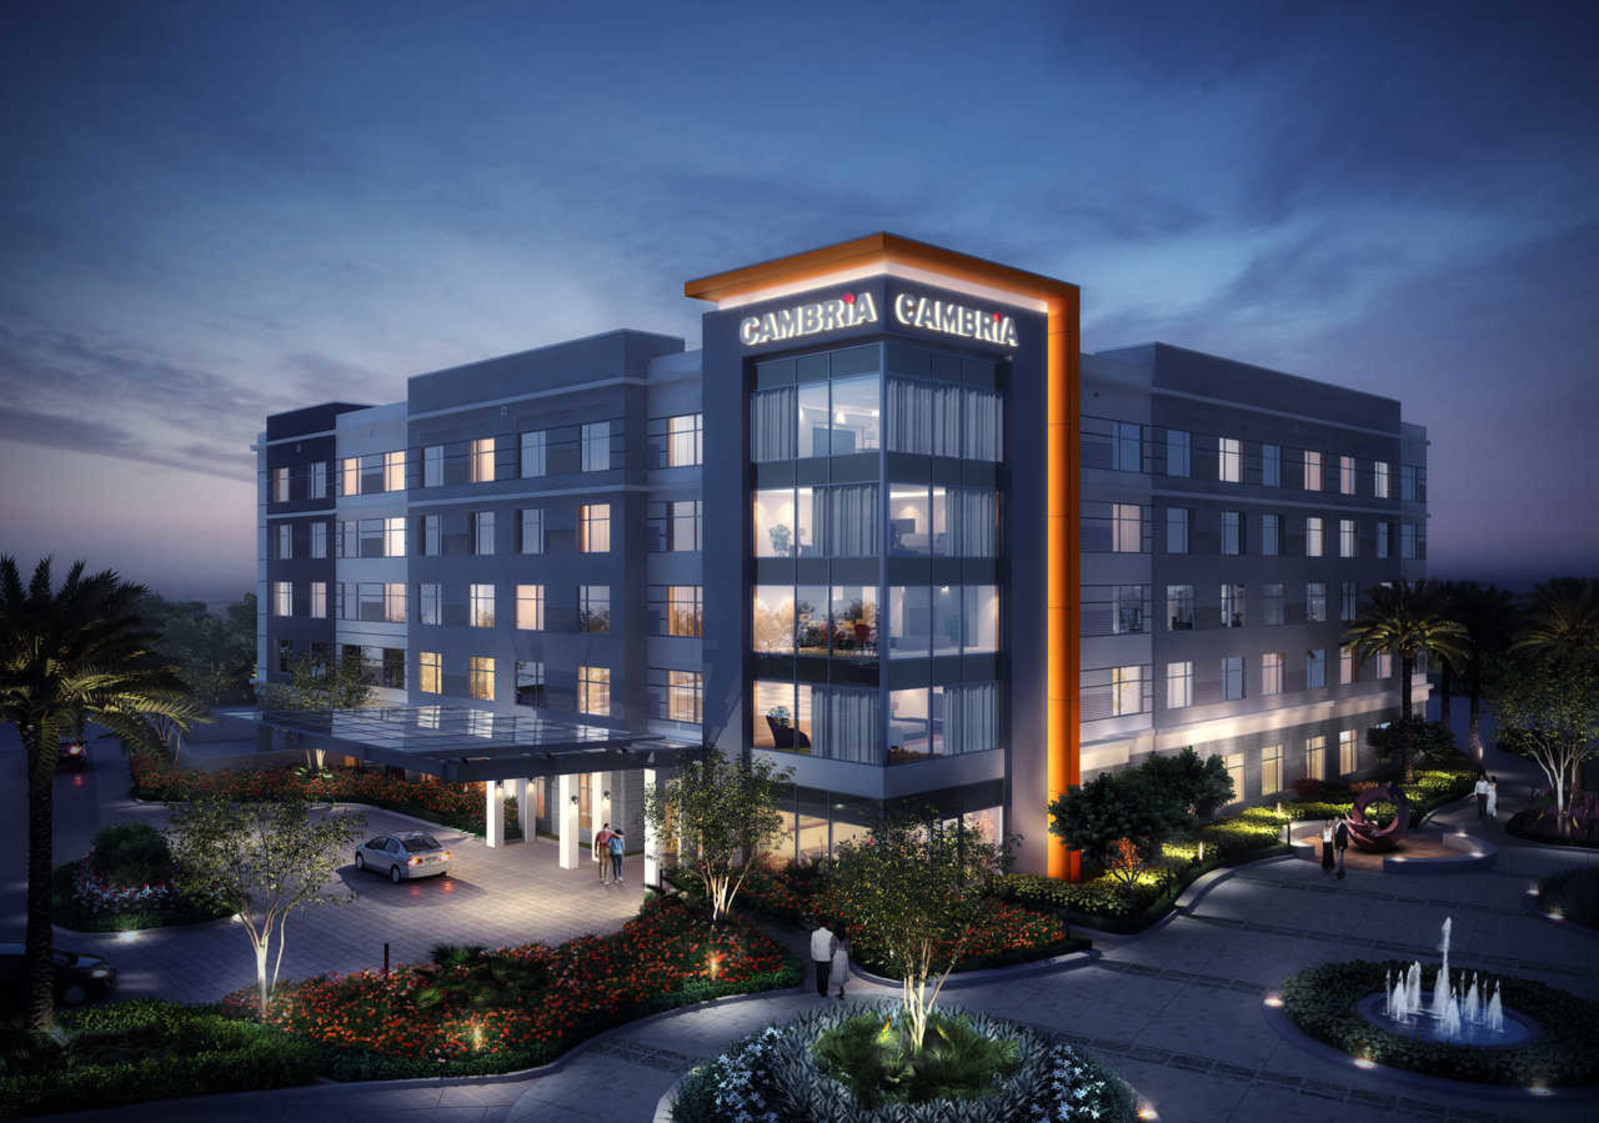 The new Cambria hotel is part of the Chandler Viridian a 25-acre mixed-use development project including office space apart